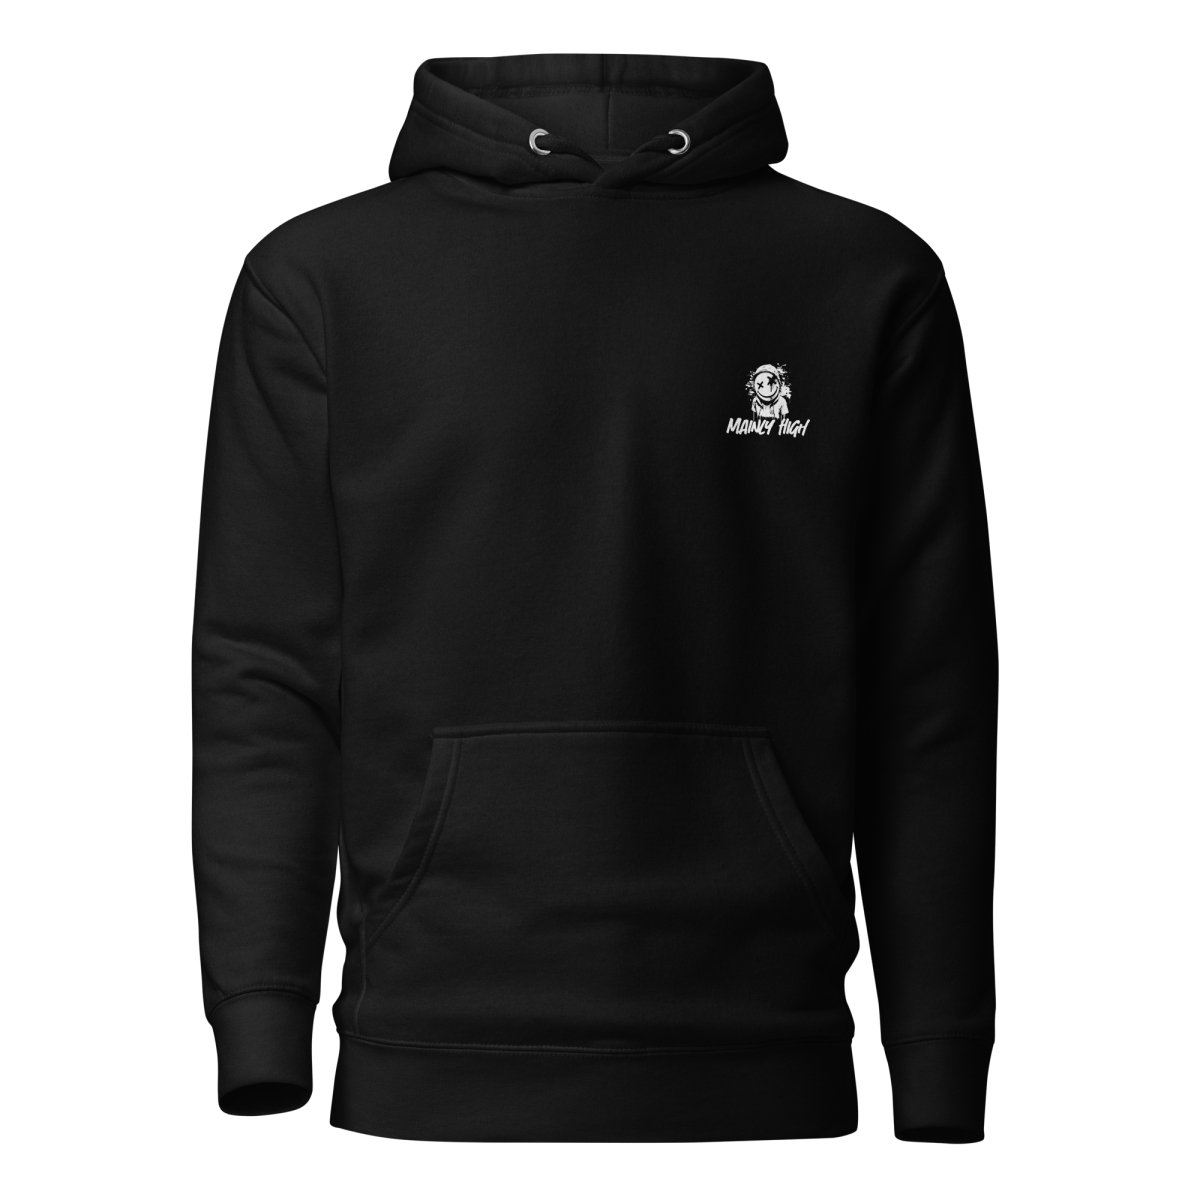 Road Dawg Hoodie - Mainly High